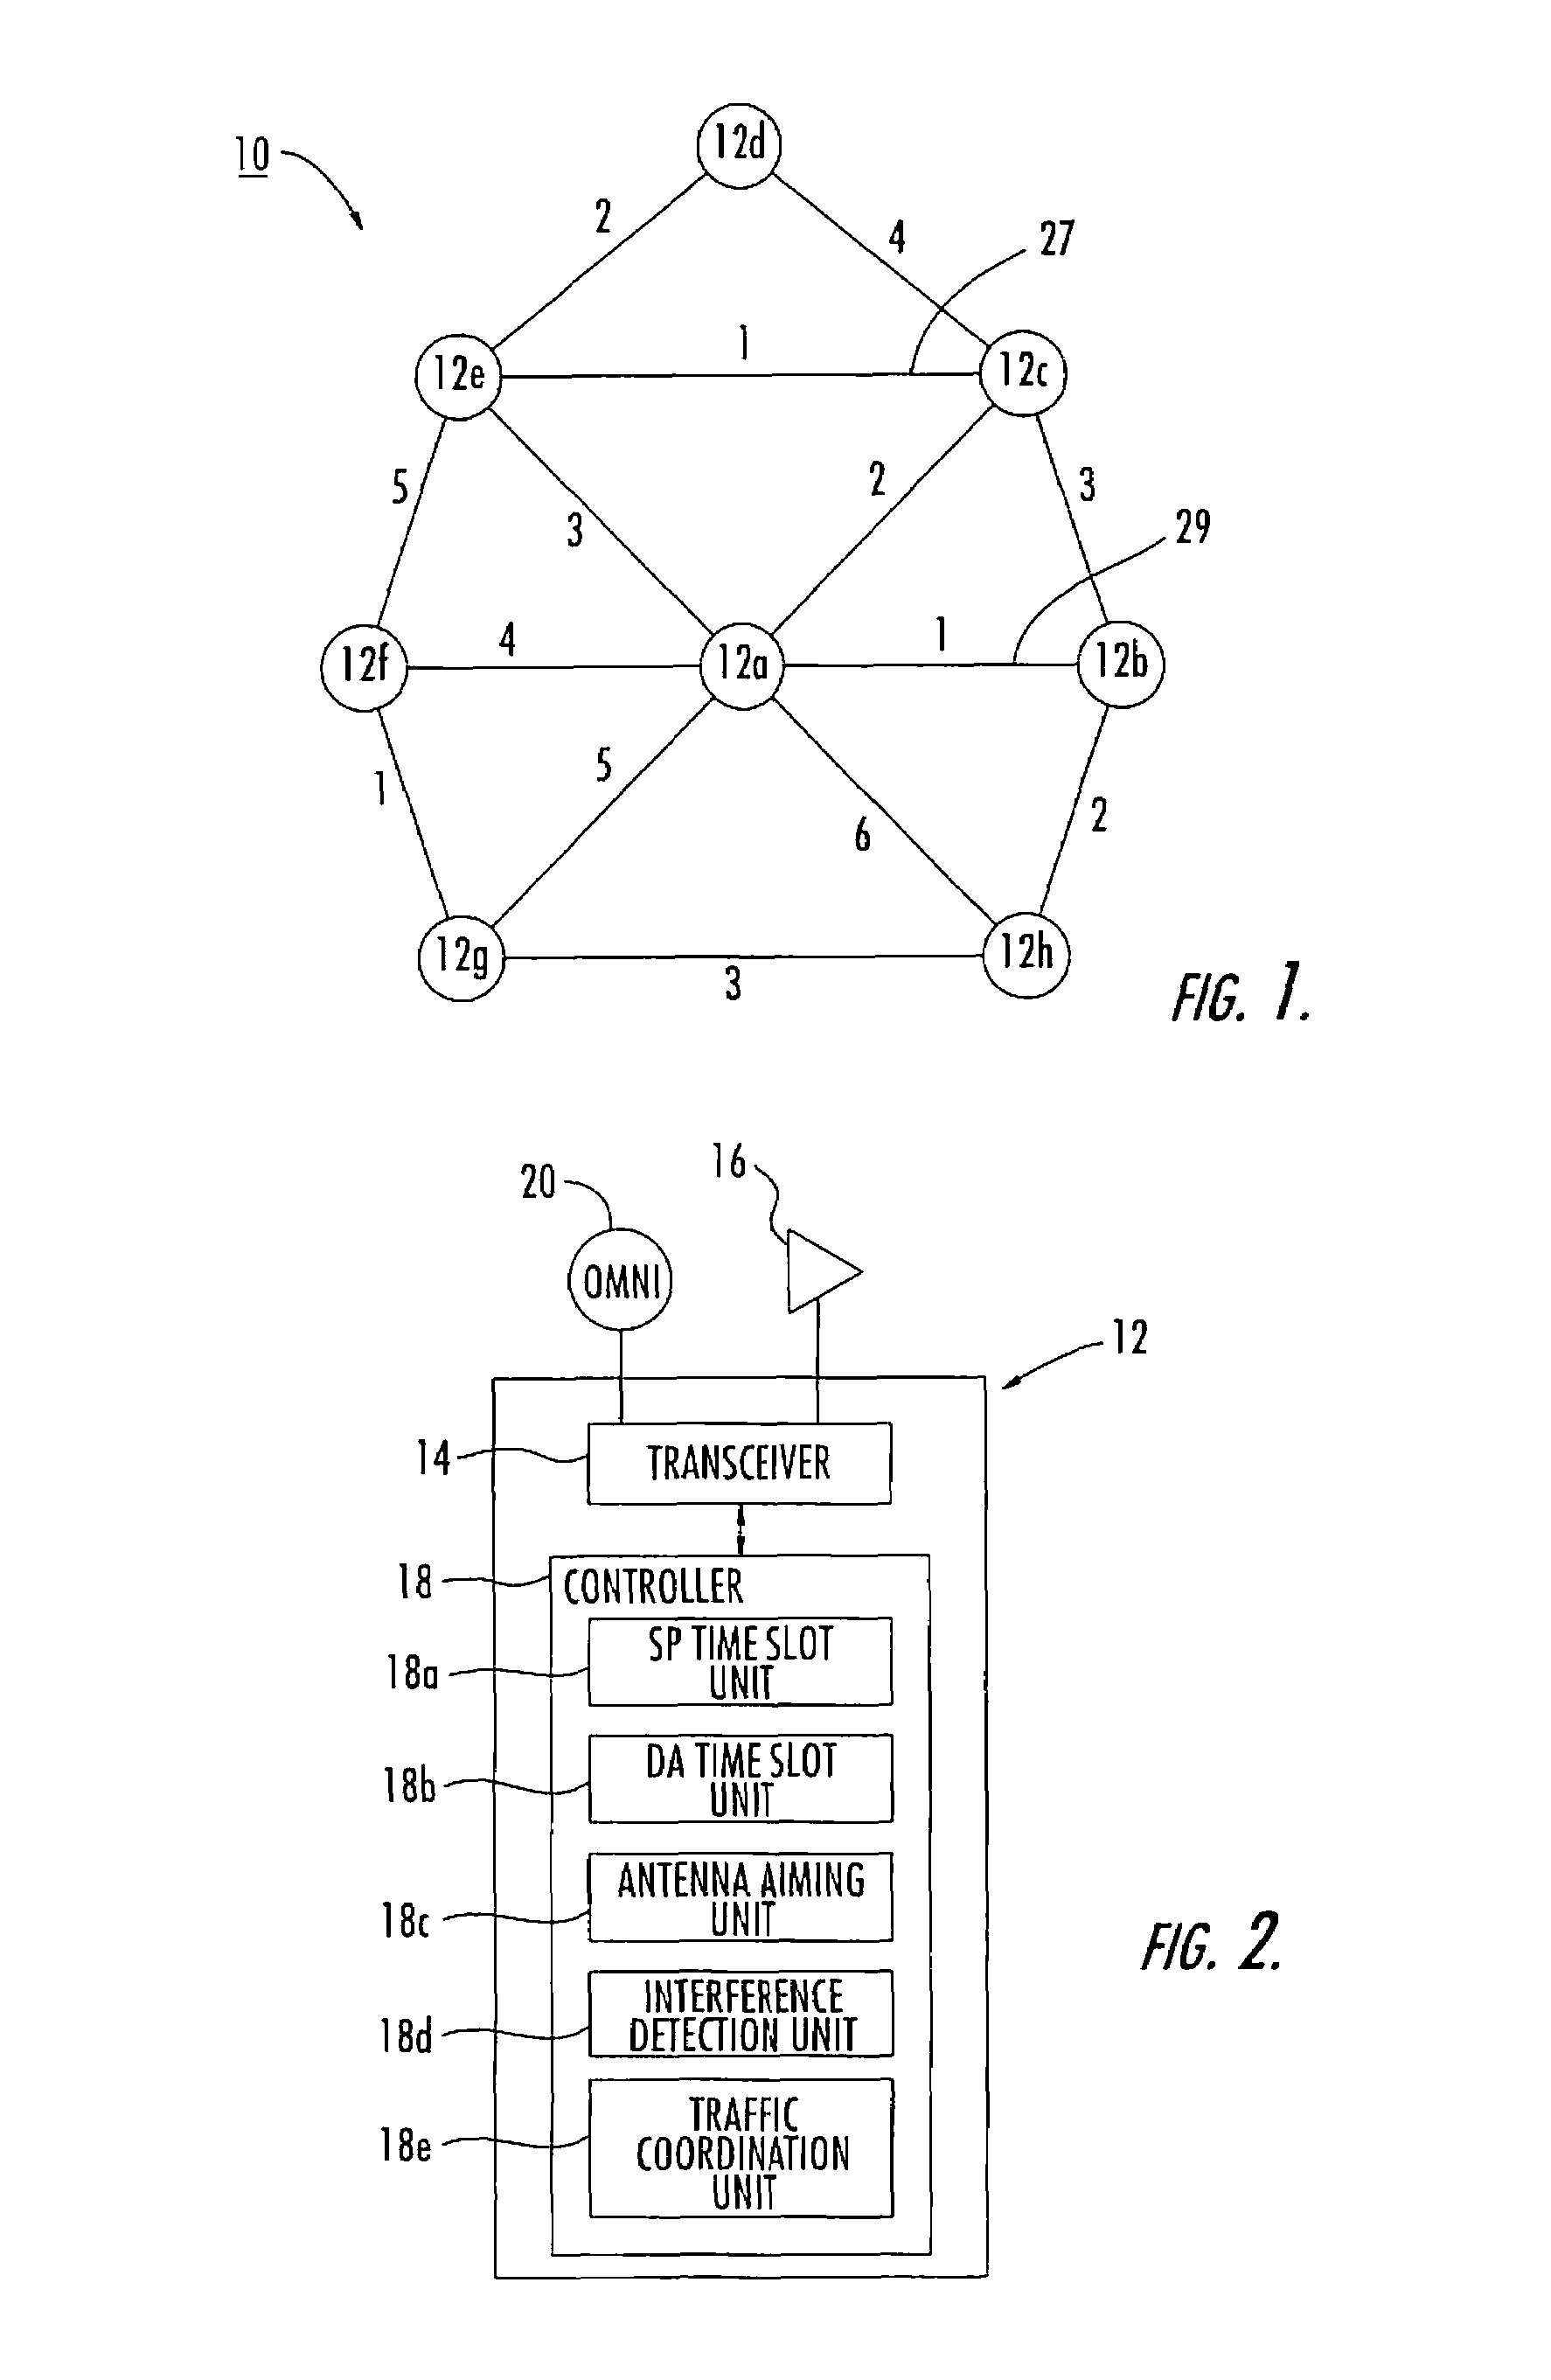 Method and device for establishing communication links and handling unbalanced traffic loads in a communication system